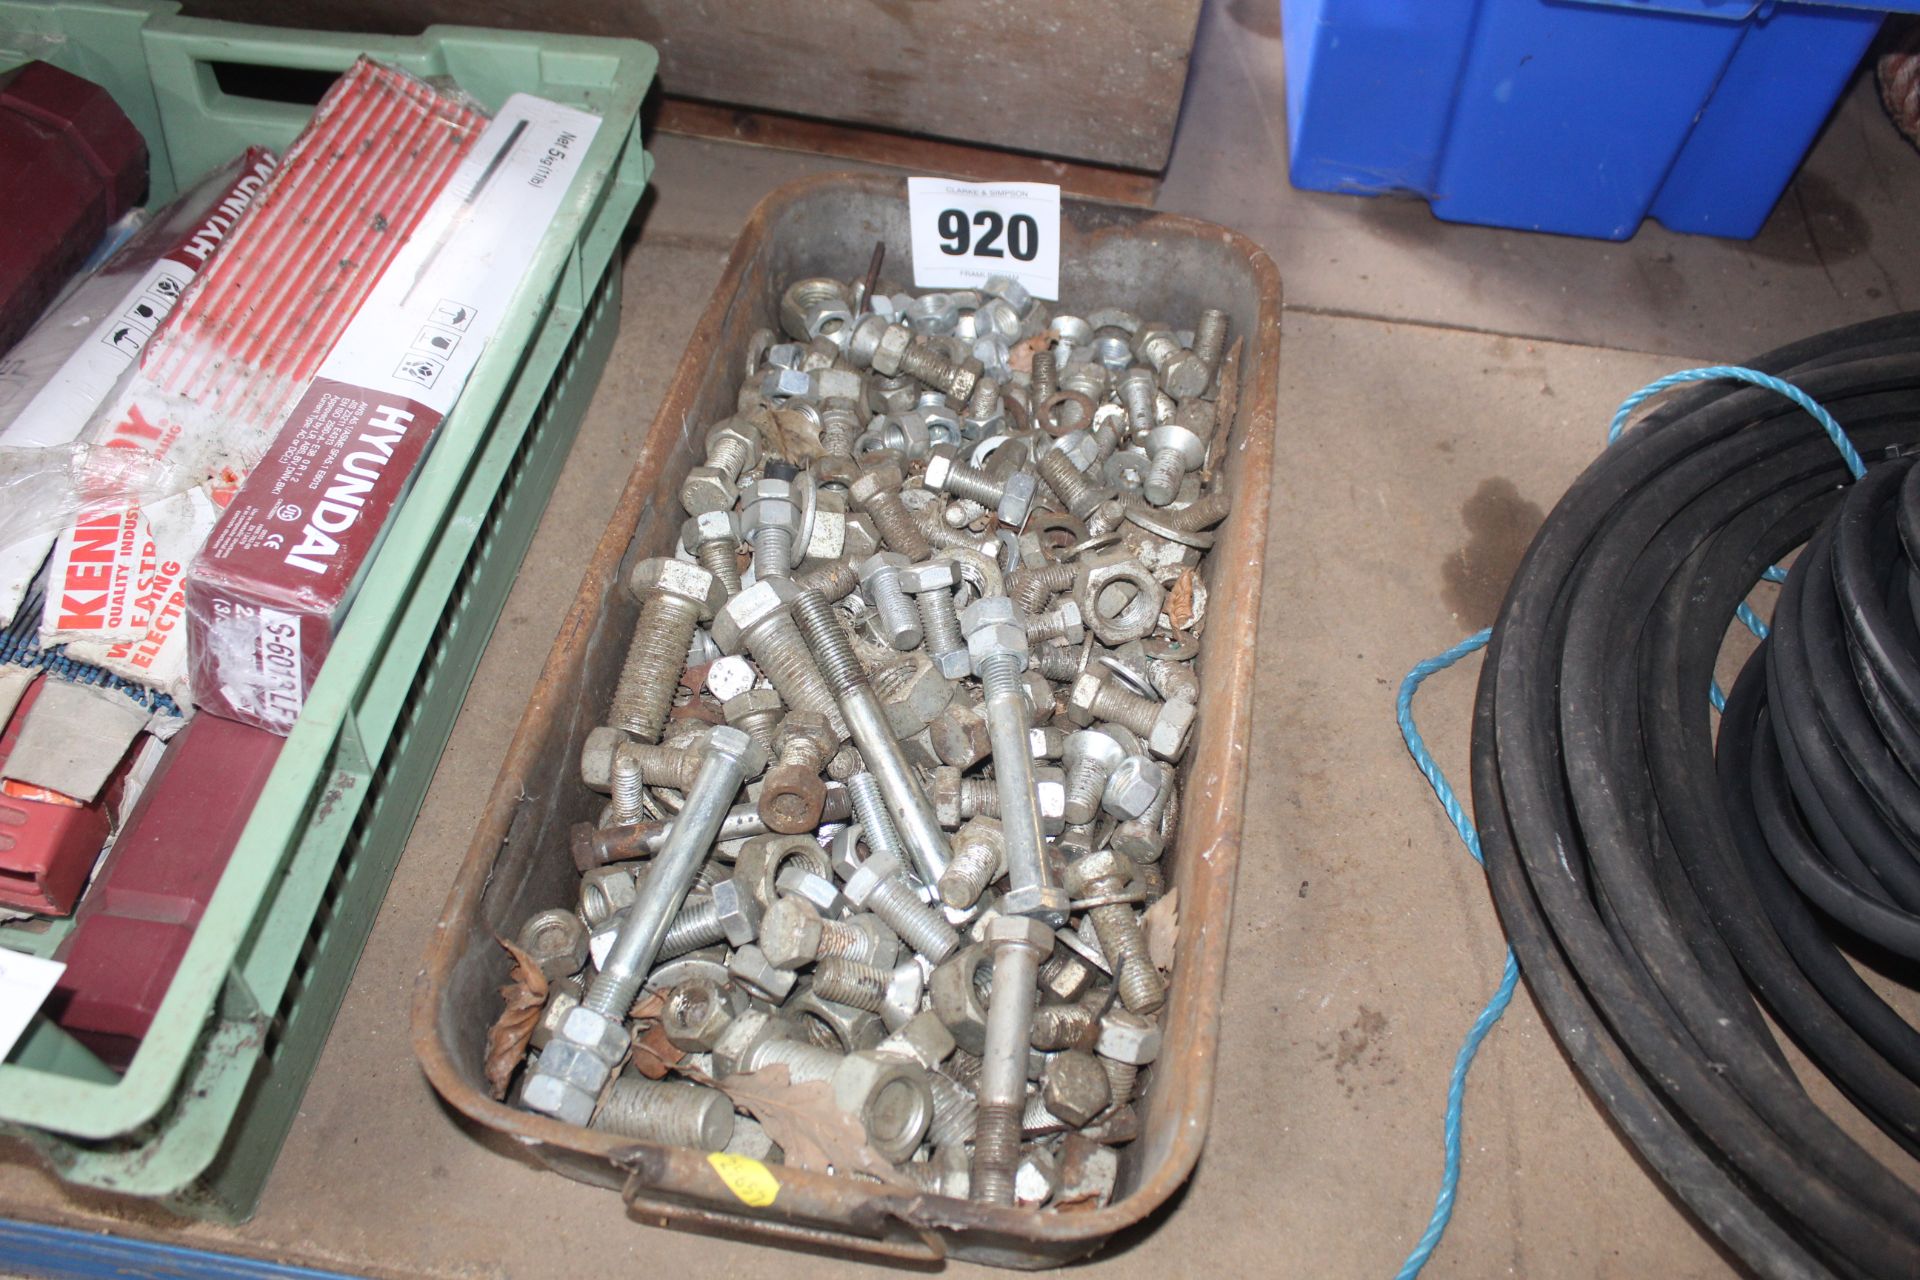 Tray of nuts and bolts.